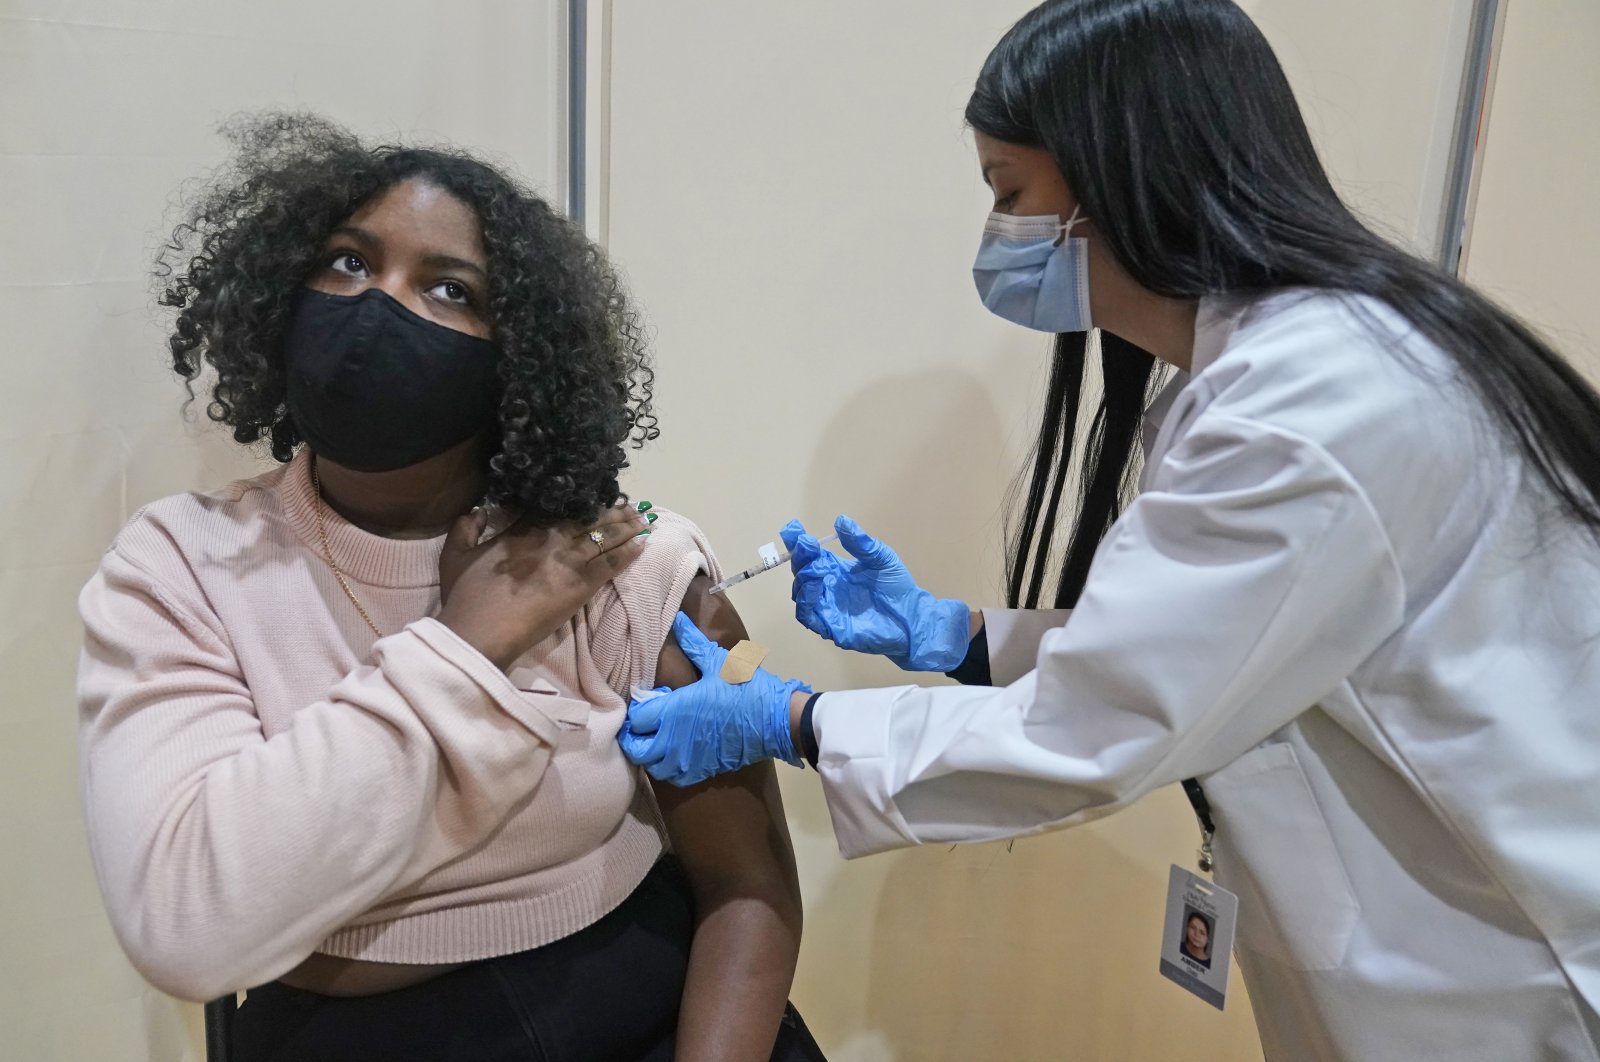 Keidy Ventura, 17, receives her first dose of the Pfizer COVID-19 vaccine in West New York, N.J., Monday, April 19, 2021. (AP Photo)